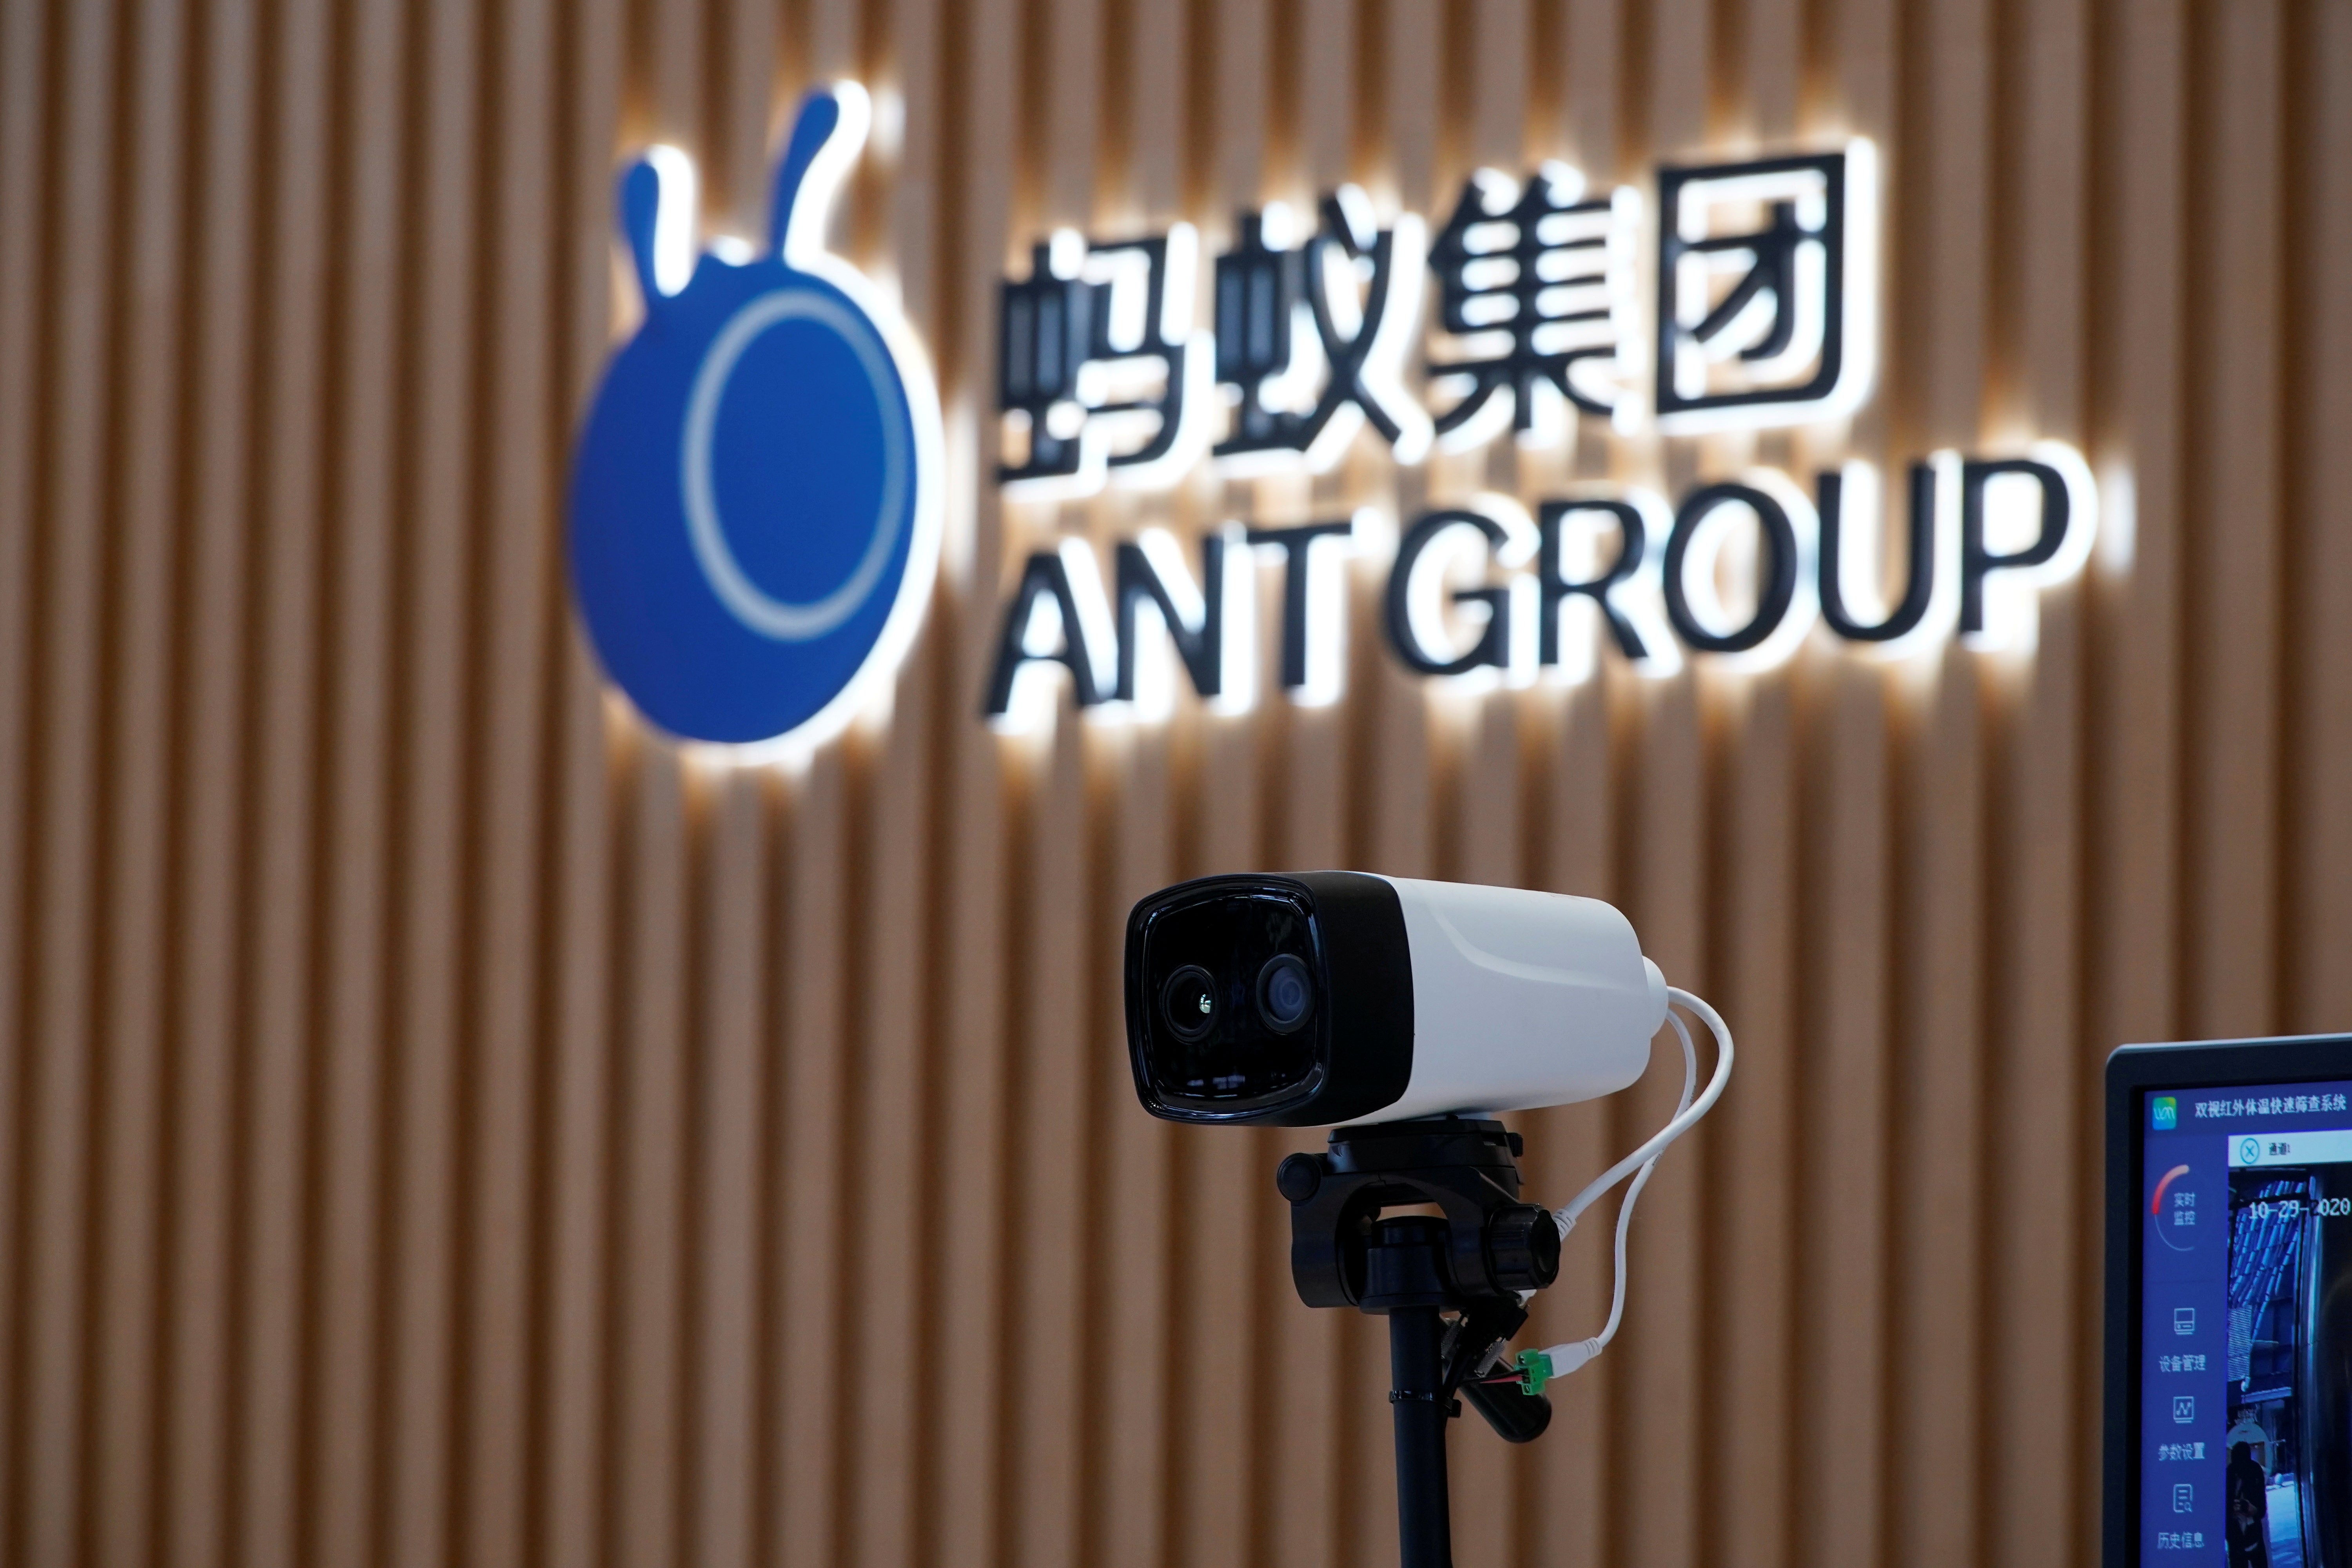 File image: Ant Group, which is backed by Jack Ma, has been facing a tough time over the past few months